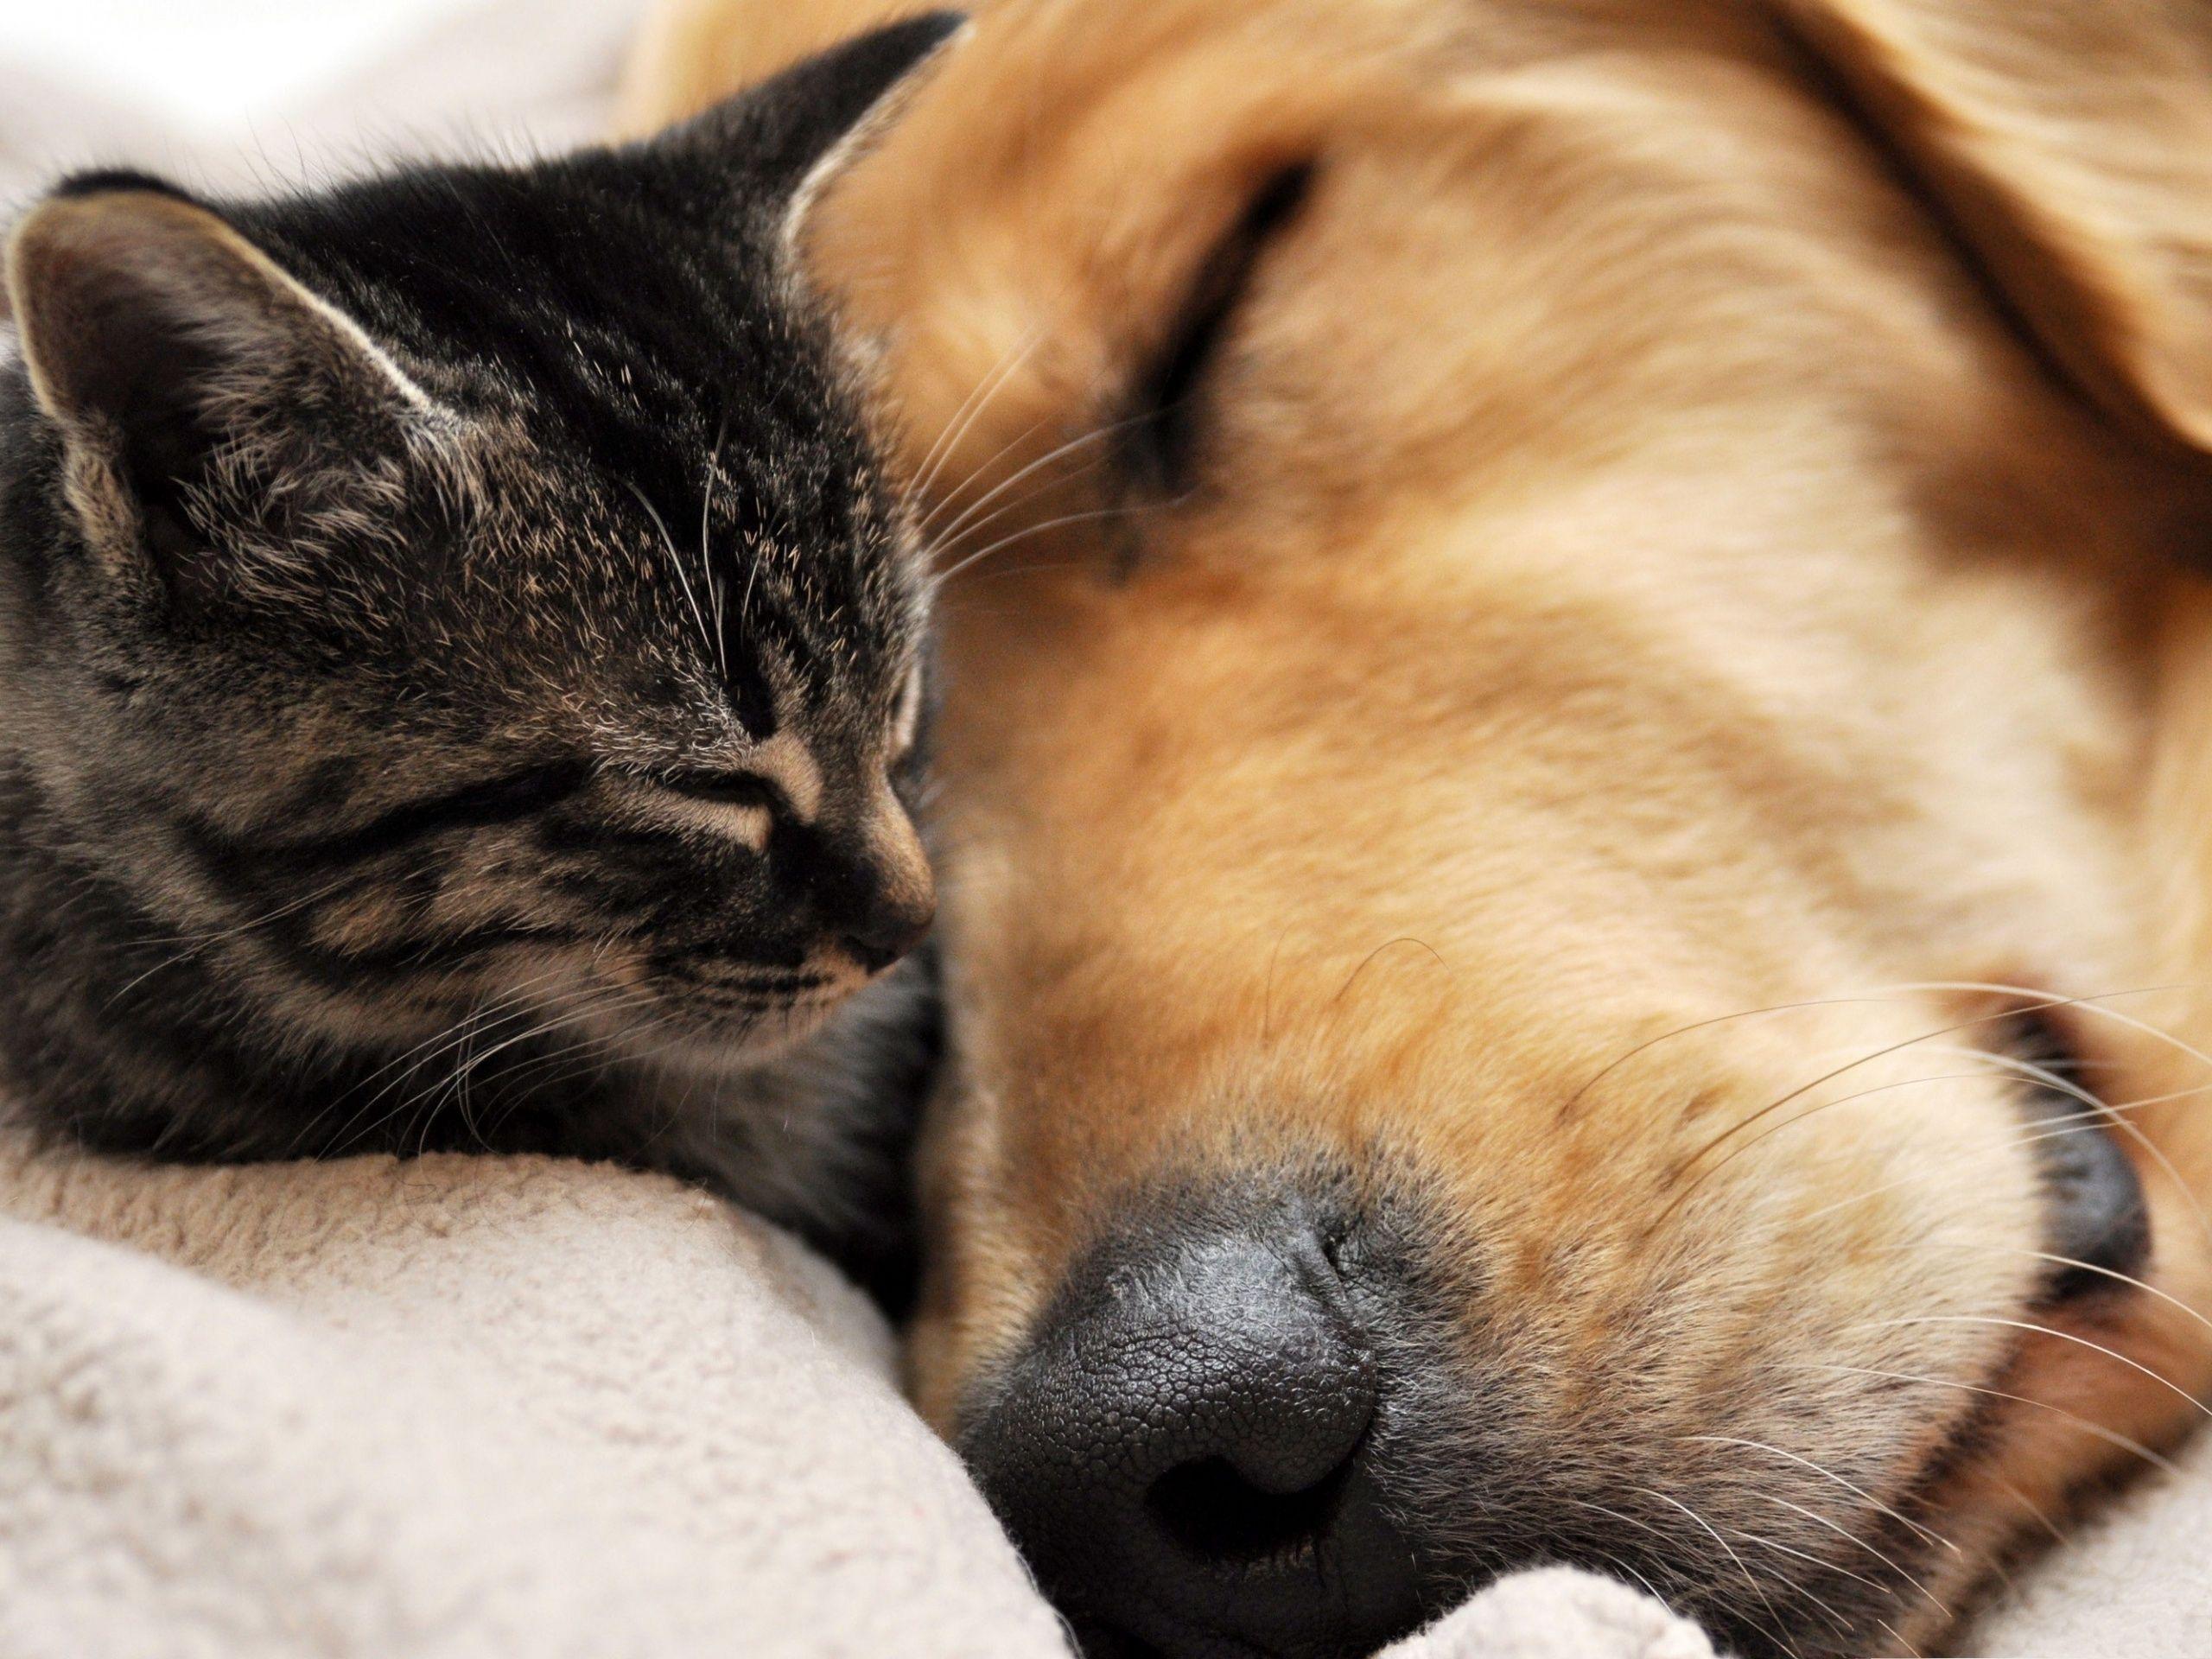 Kitten and Puppy Wallpaper Android Apps on Google Play. HD